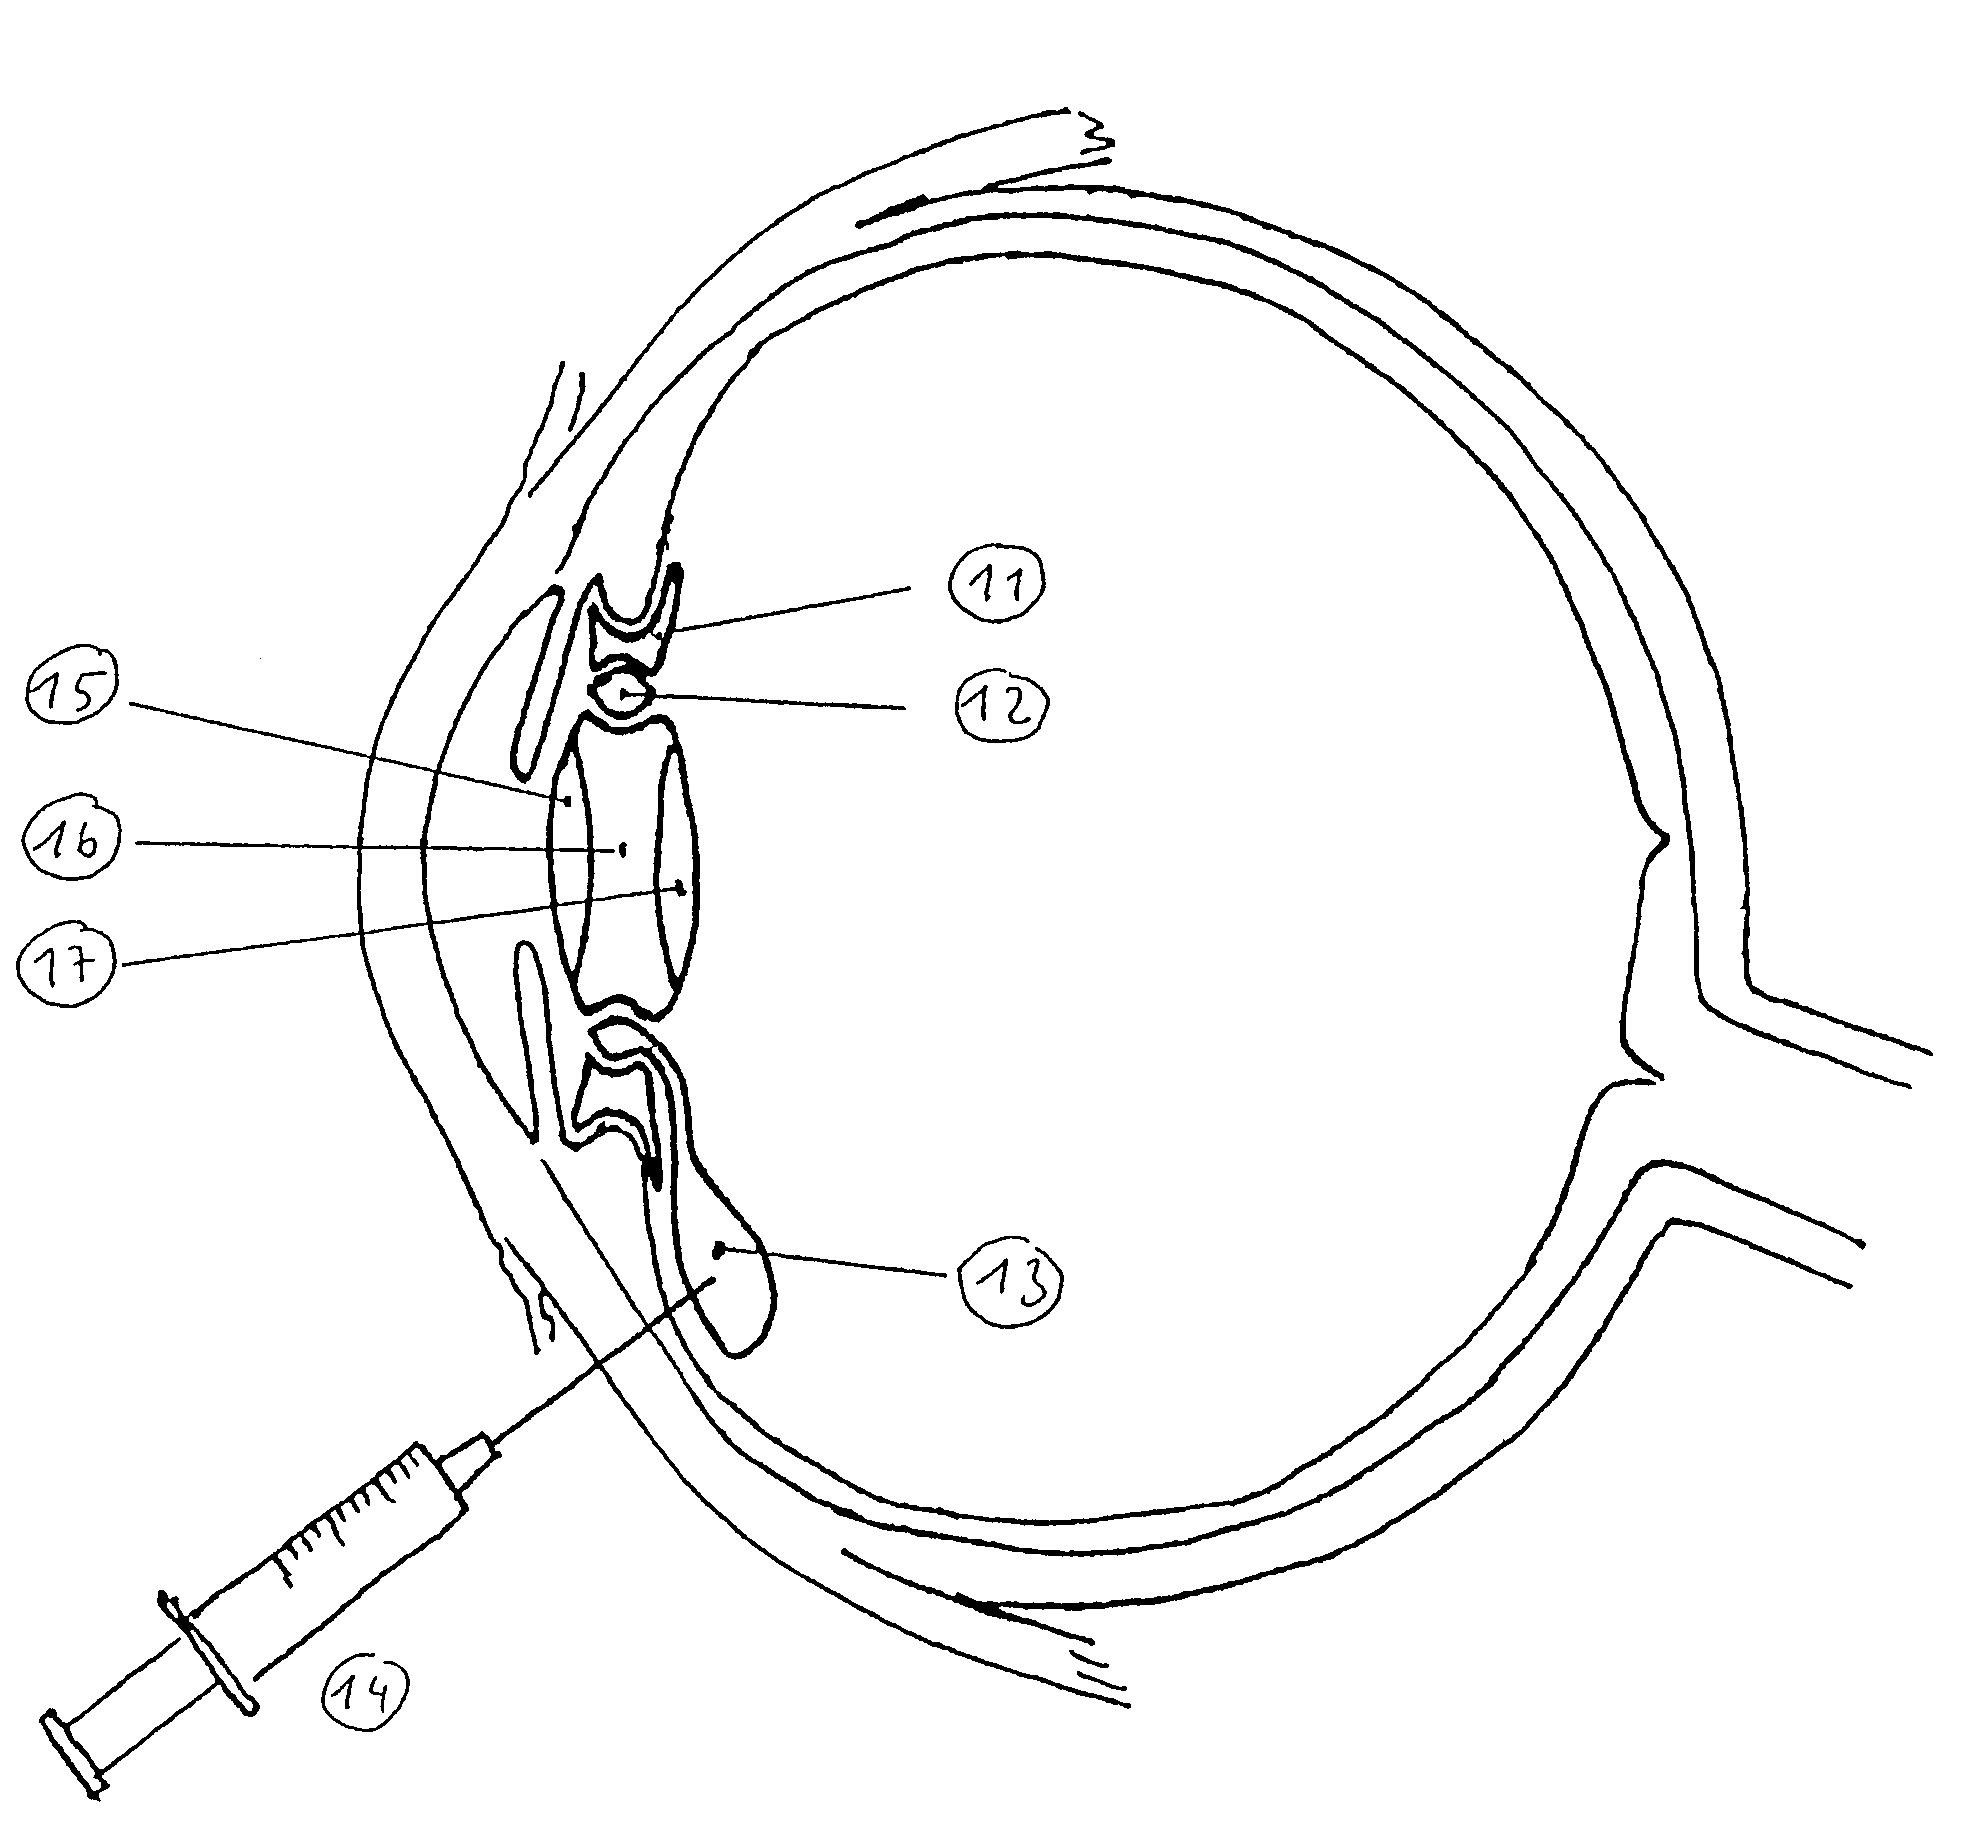 Accommodative lens implant, controlled by the ciliary muscle